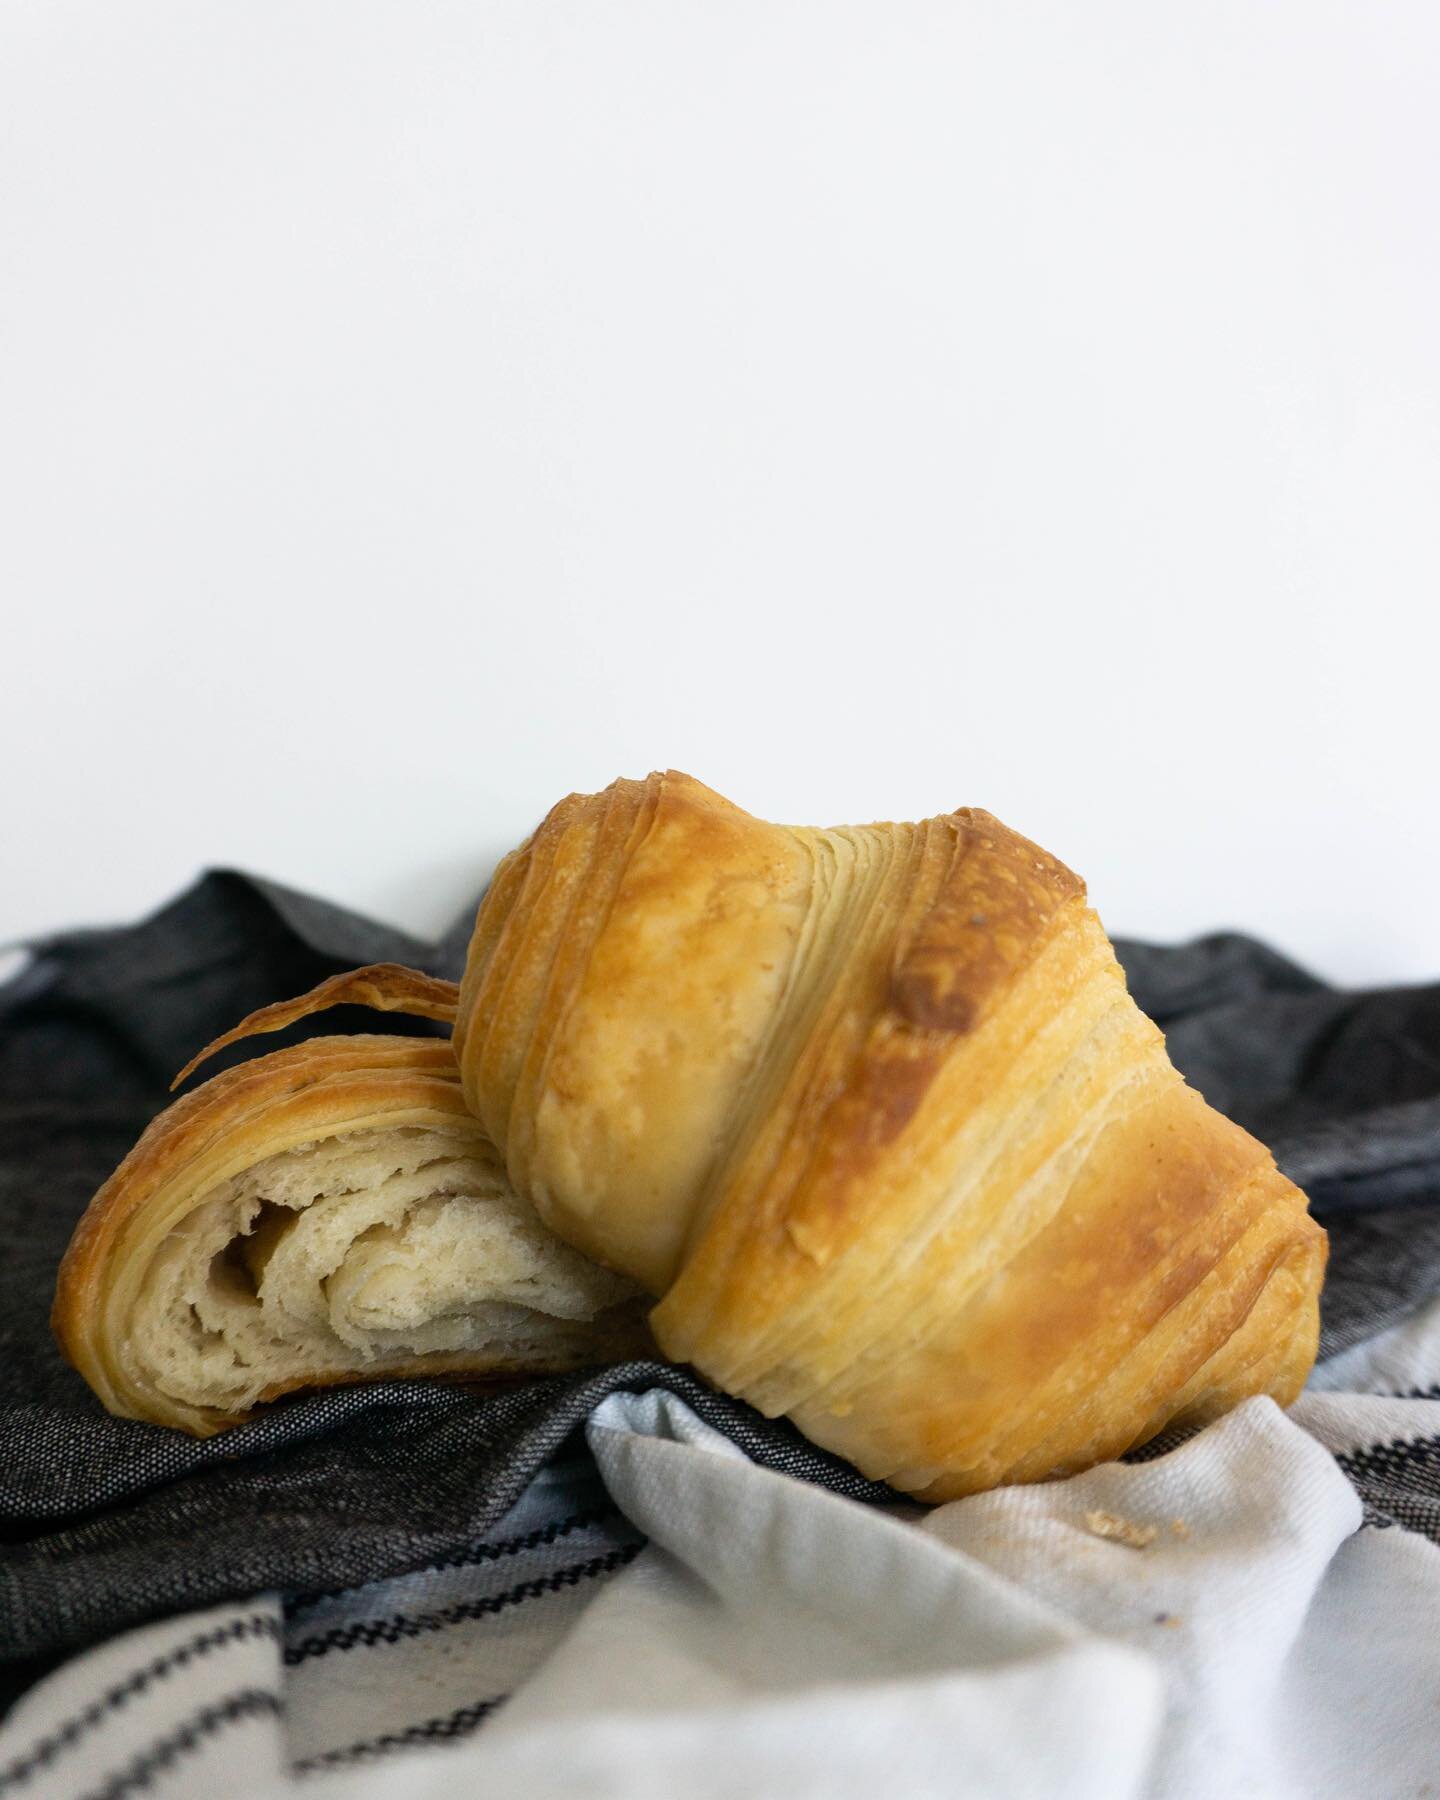 Plant-Based Croissants! 🥐
Feeling good about this first attempt, but need to practice those honeycombs. (2021.07)
Recipe from the @csaffitz x @nytcooking video, but modified to be vegan (thank goodness for @earthbalance &ldquo;butter&rdquo;).
.
.
.
